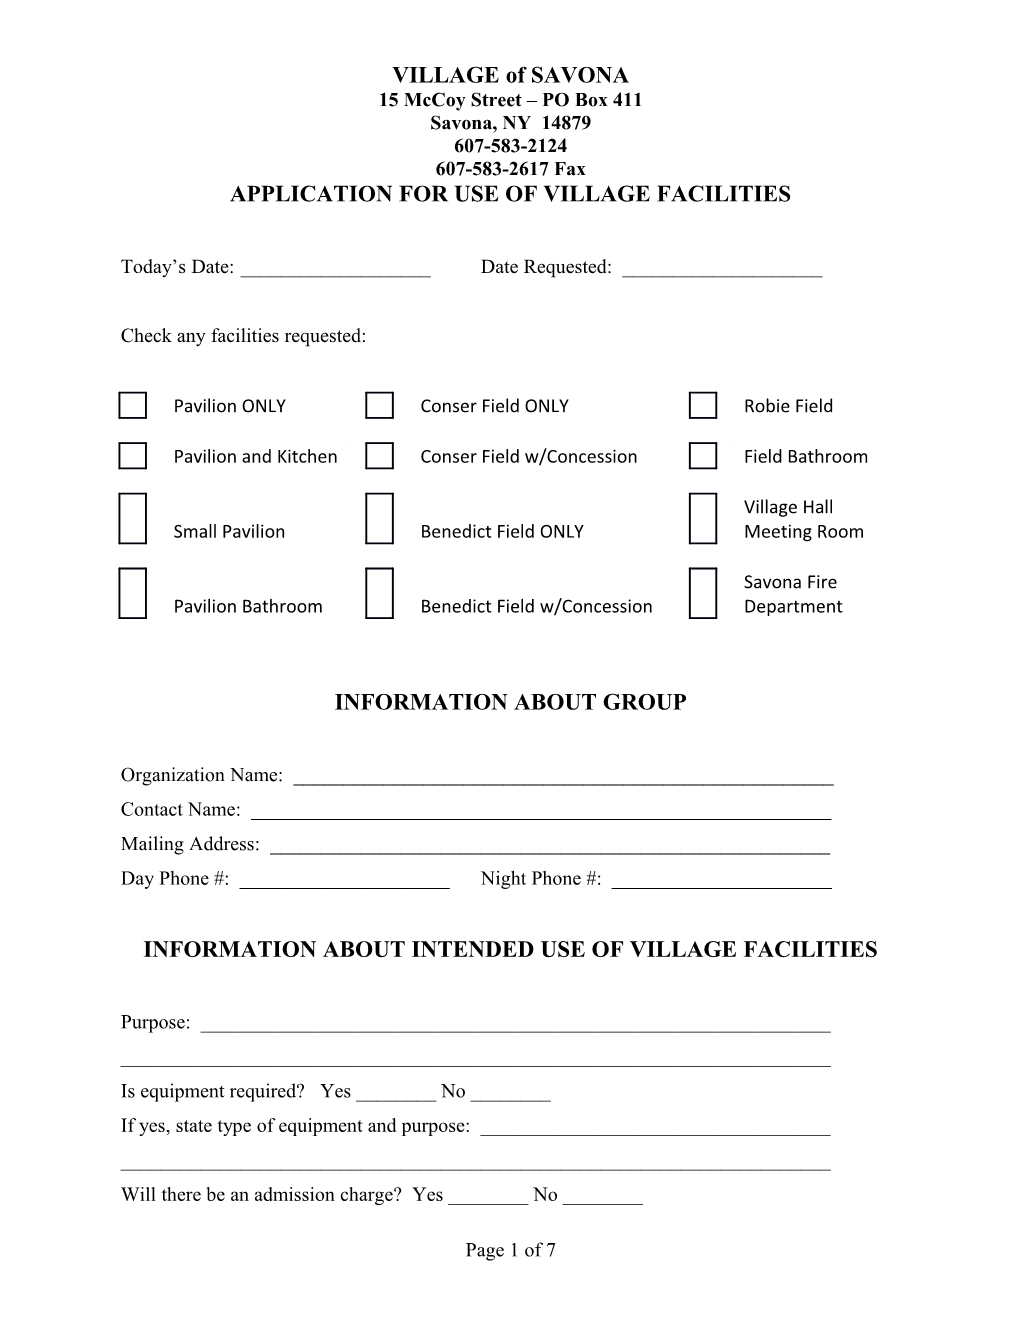 Application for Use of Village Facilities